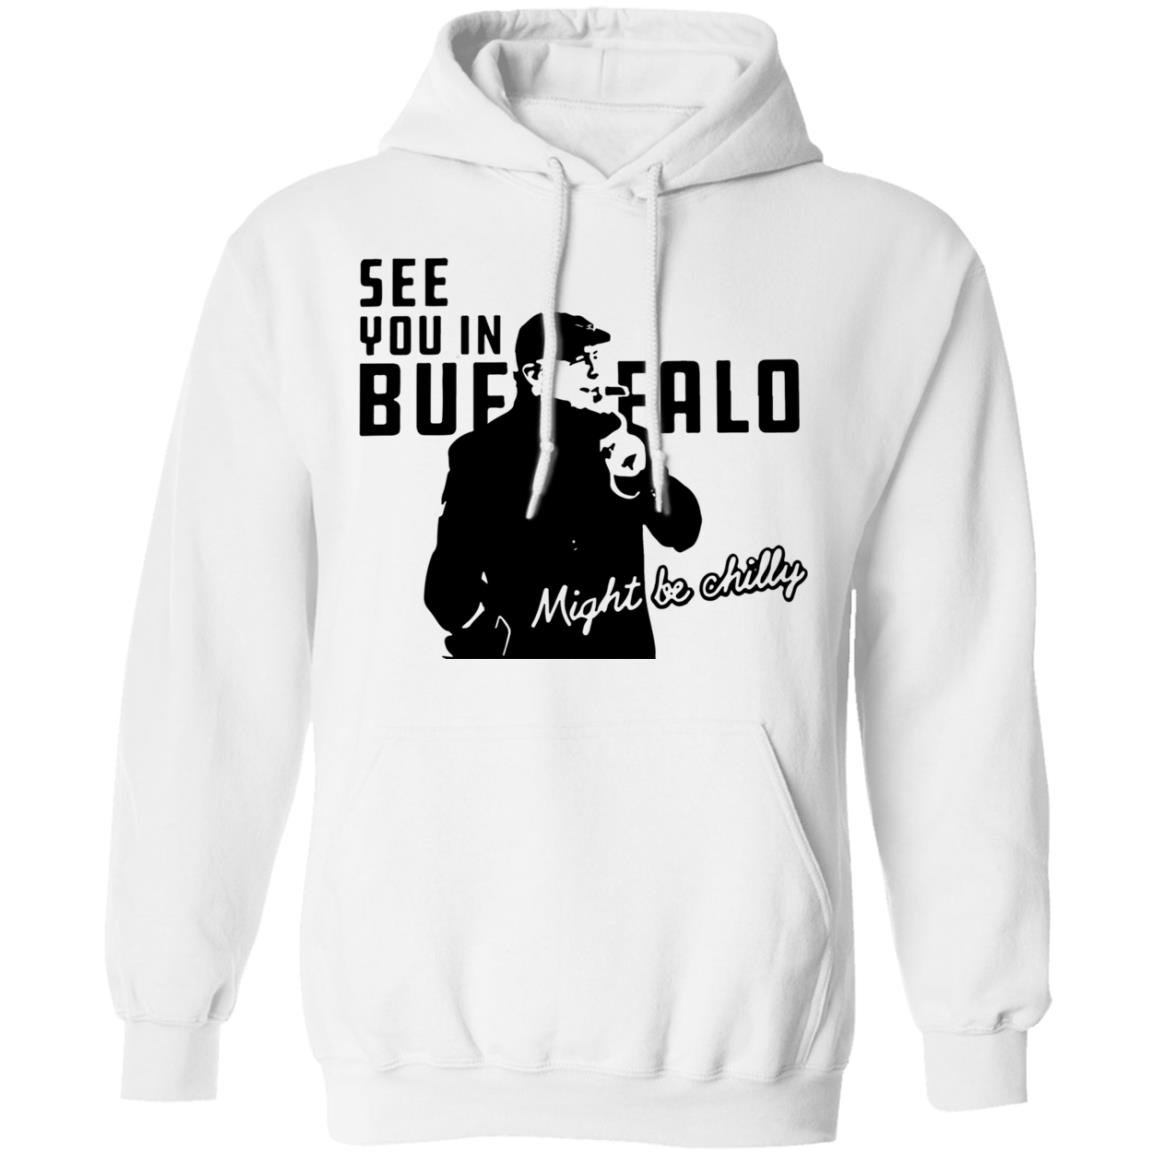 Steve Tasker See You In Buffalo Might Be Chilly Shirt 1